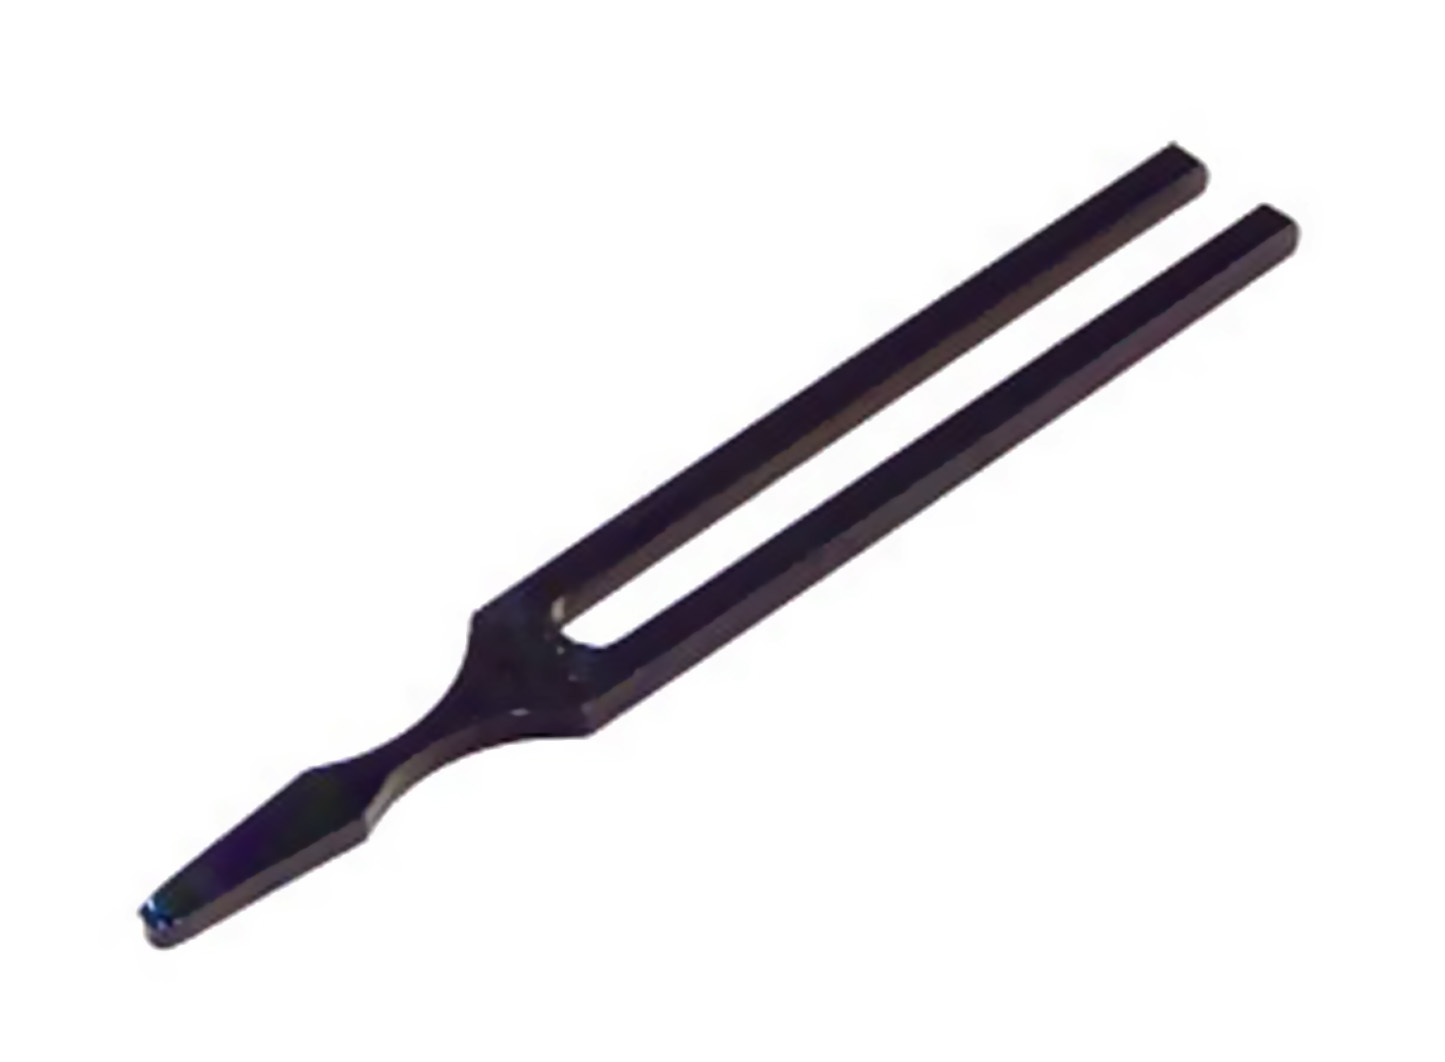 weber tuning fork used for